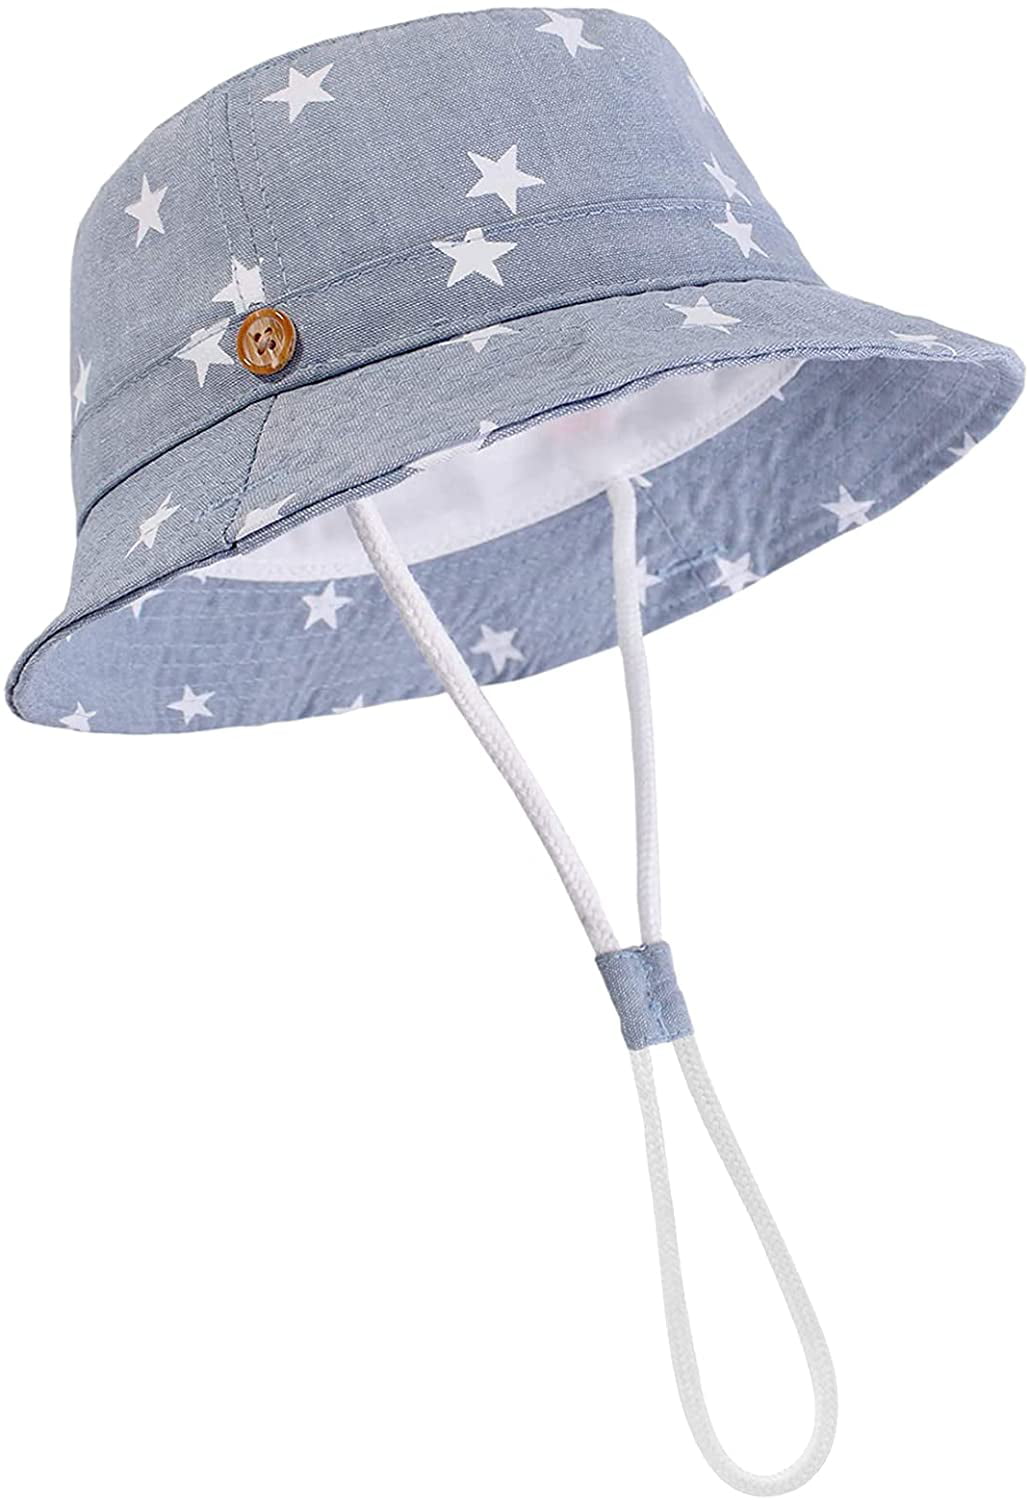 Bucket Hat Star Patterned Cap Sun Protection Hat Wide Brim Cotton Cap for Toddler Boys Girls Summer Wearing 